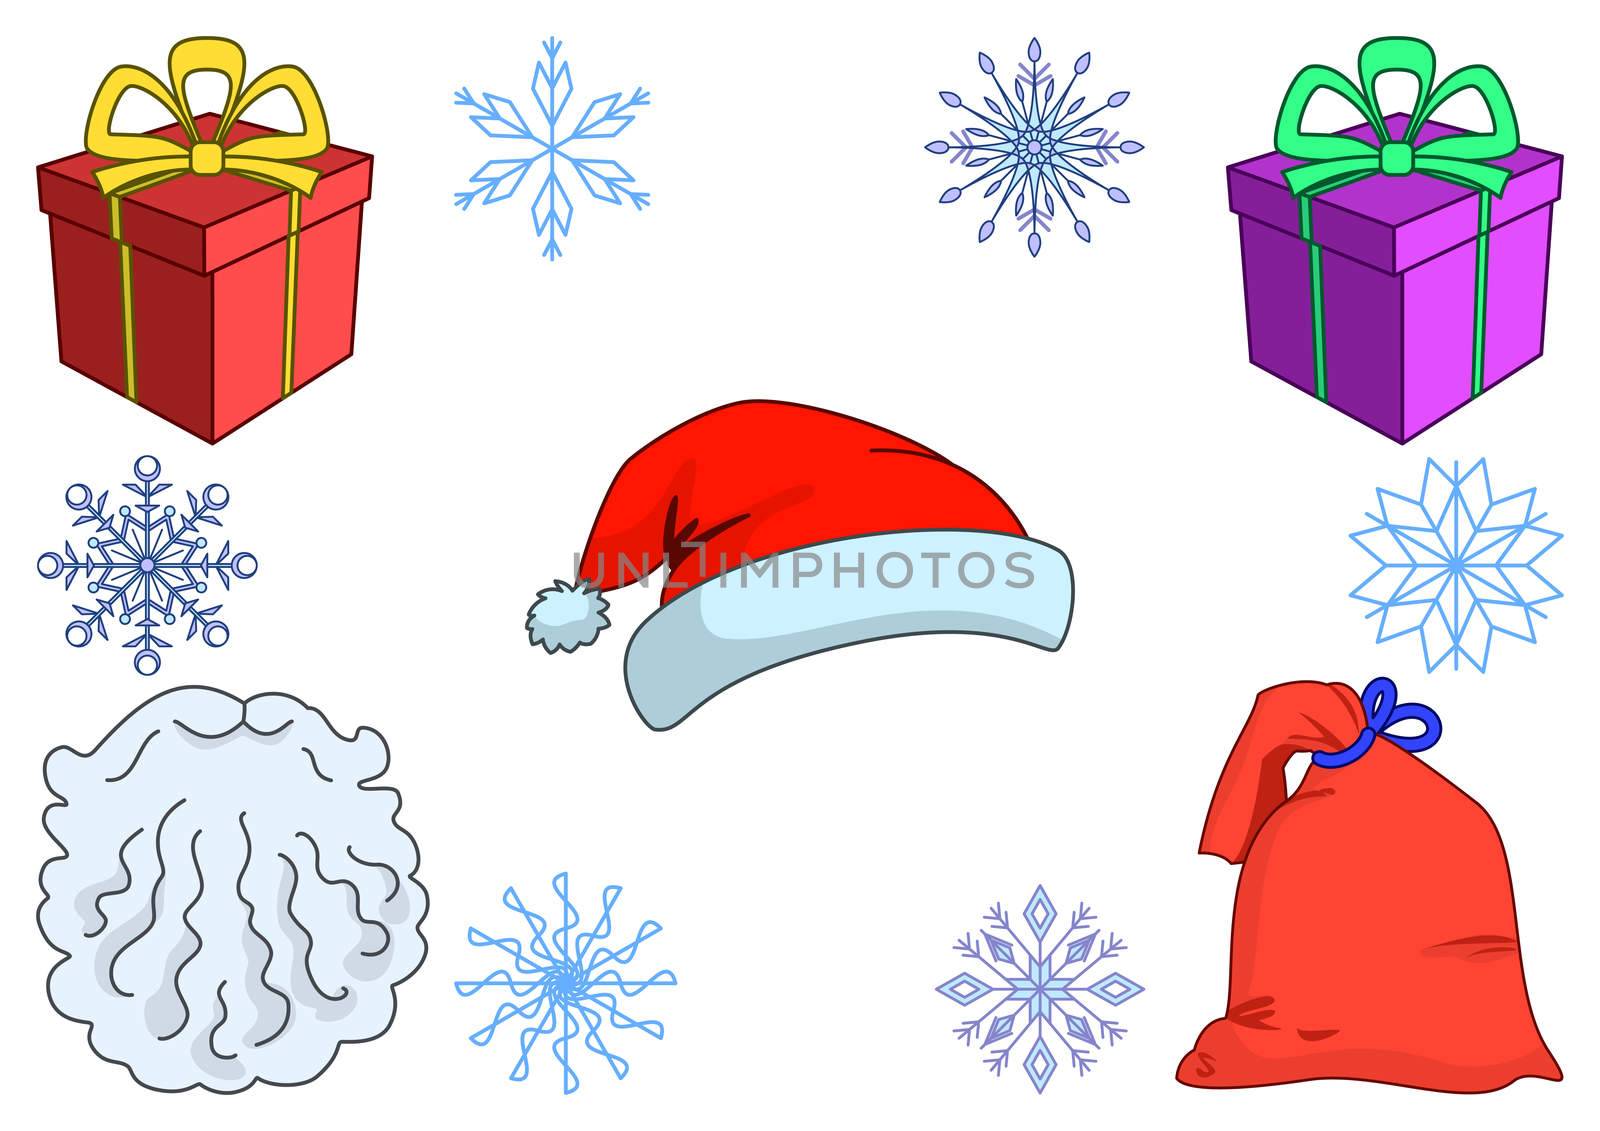 Objects connected with the Santa Claus: gift boxes, a bag with gifts, a beard, a cap, a snowflakes.